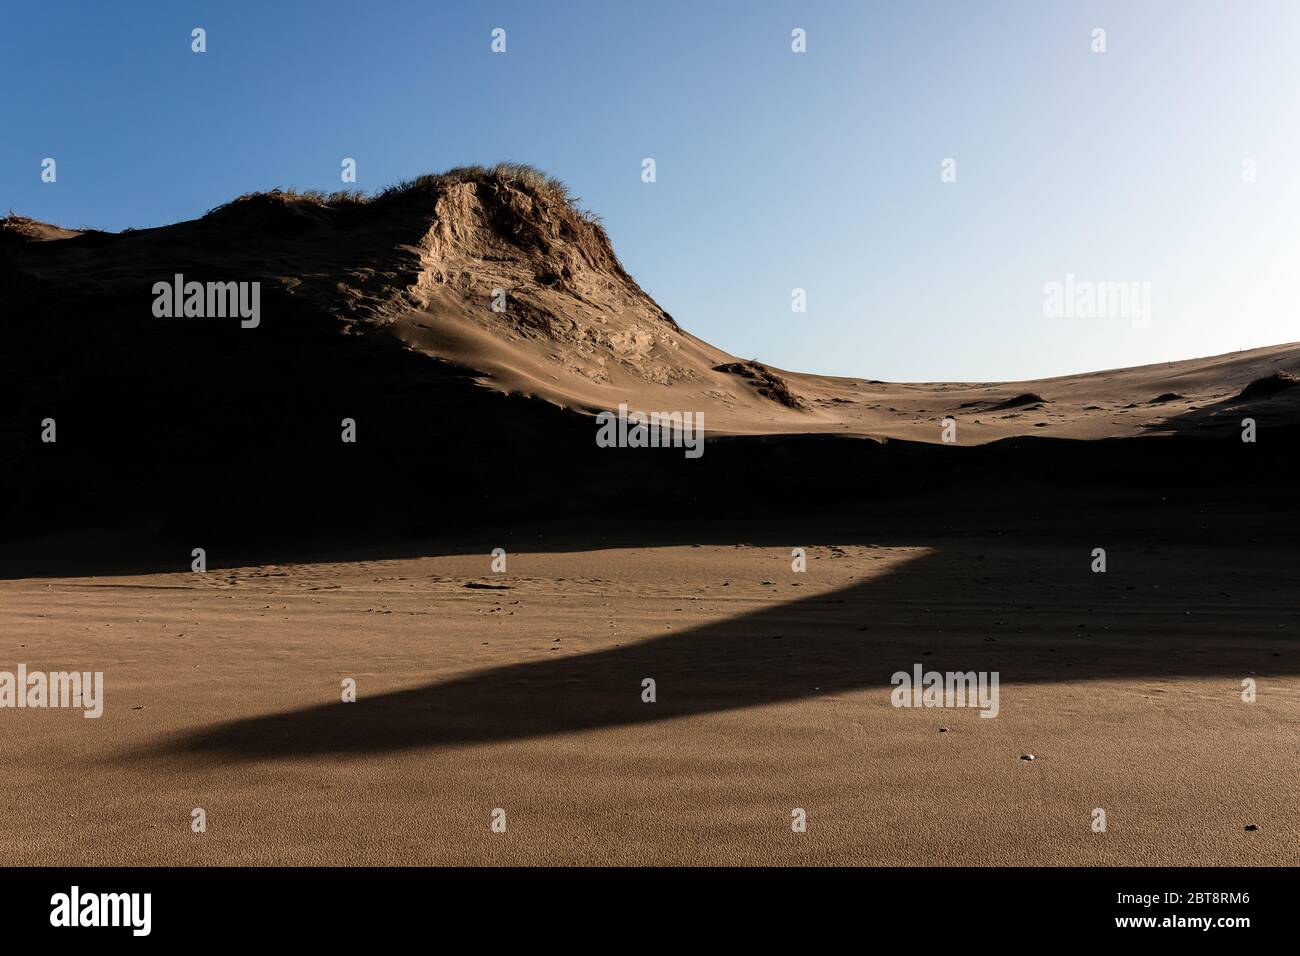 Sand dunes on 90 mile beach at dawn, New Zealand, October 2019 Stock Photo